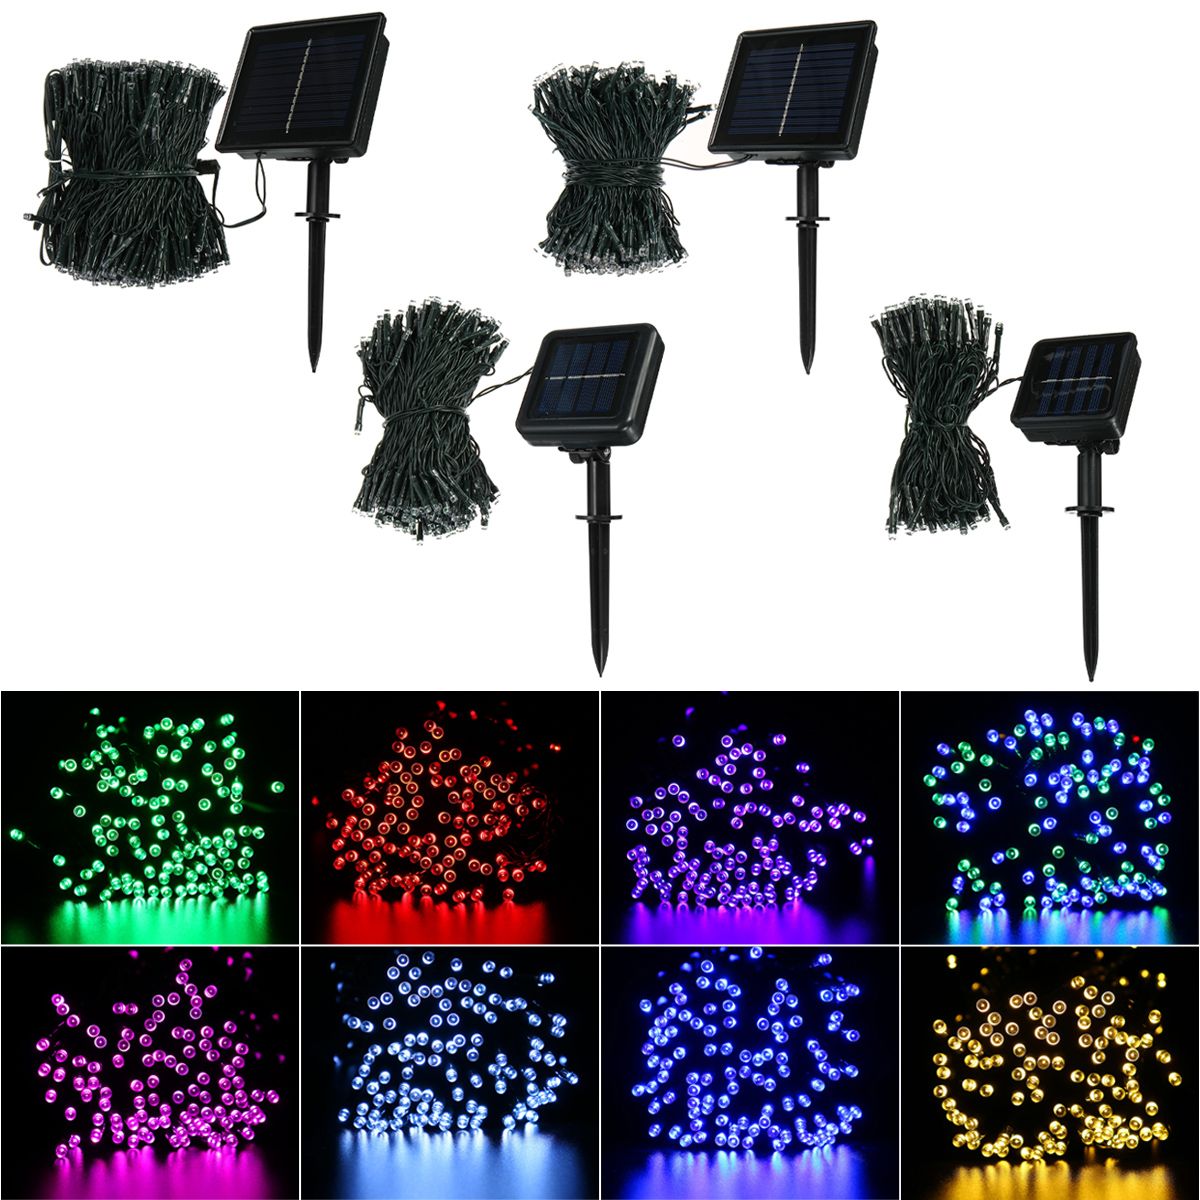 12M22M32M52M-Outdoor-LED-Solar-String-Light-8-Modes-Waterproof-Home-Decorative-Lawn-Lamp-Christmas-D-1756754